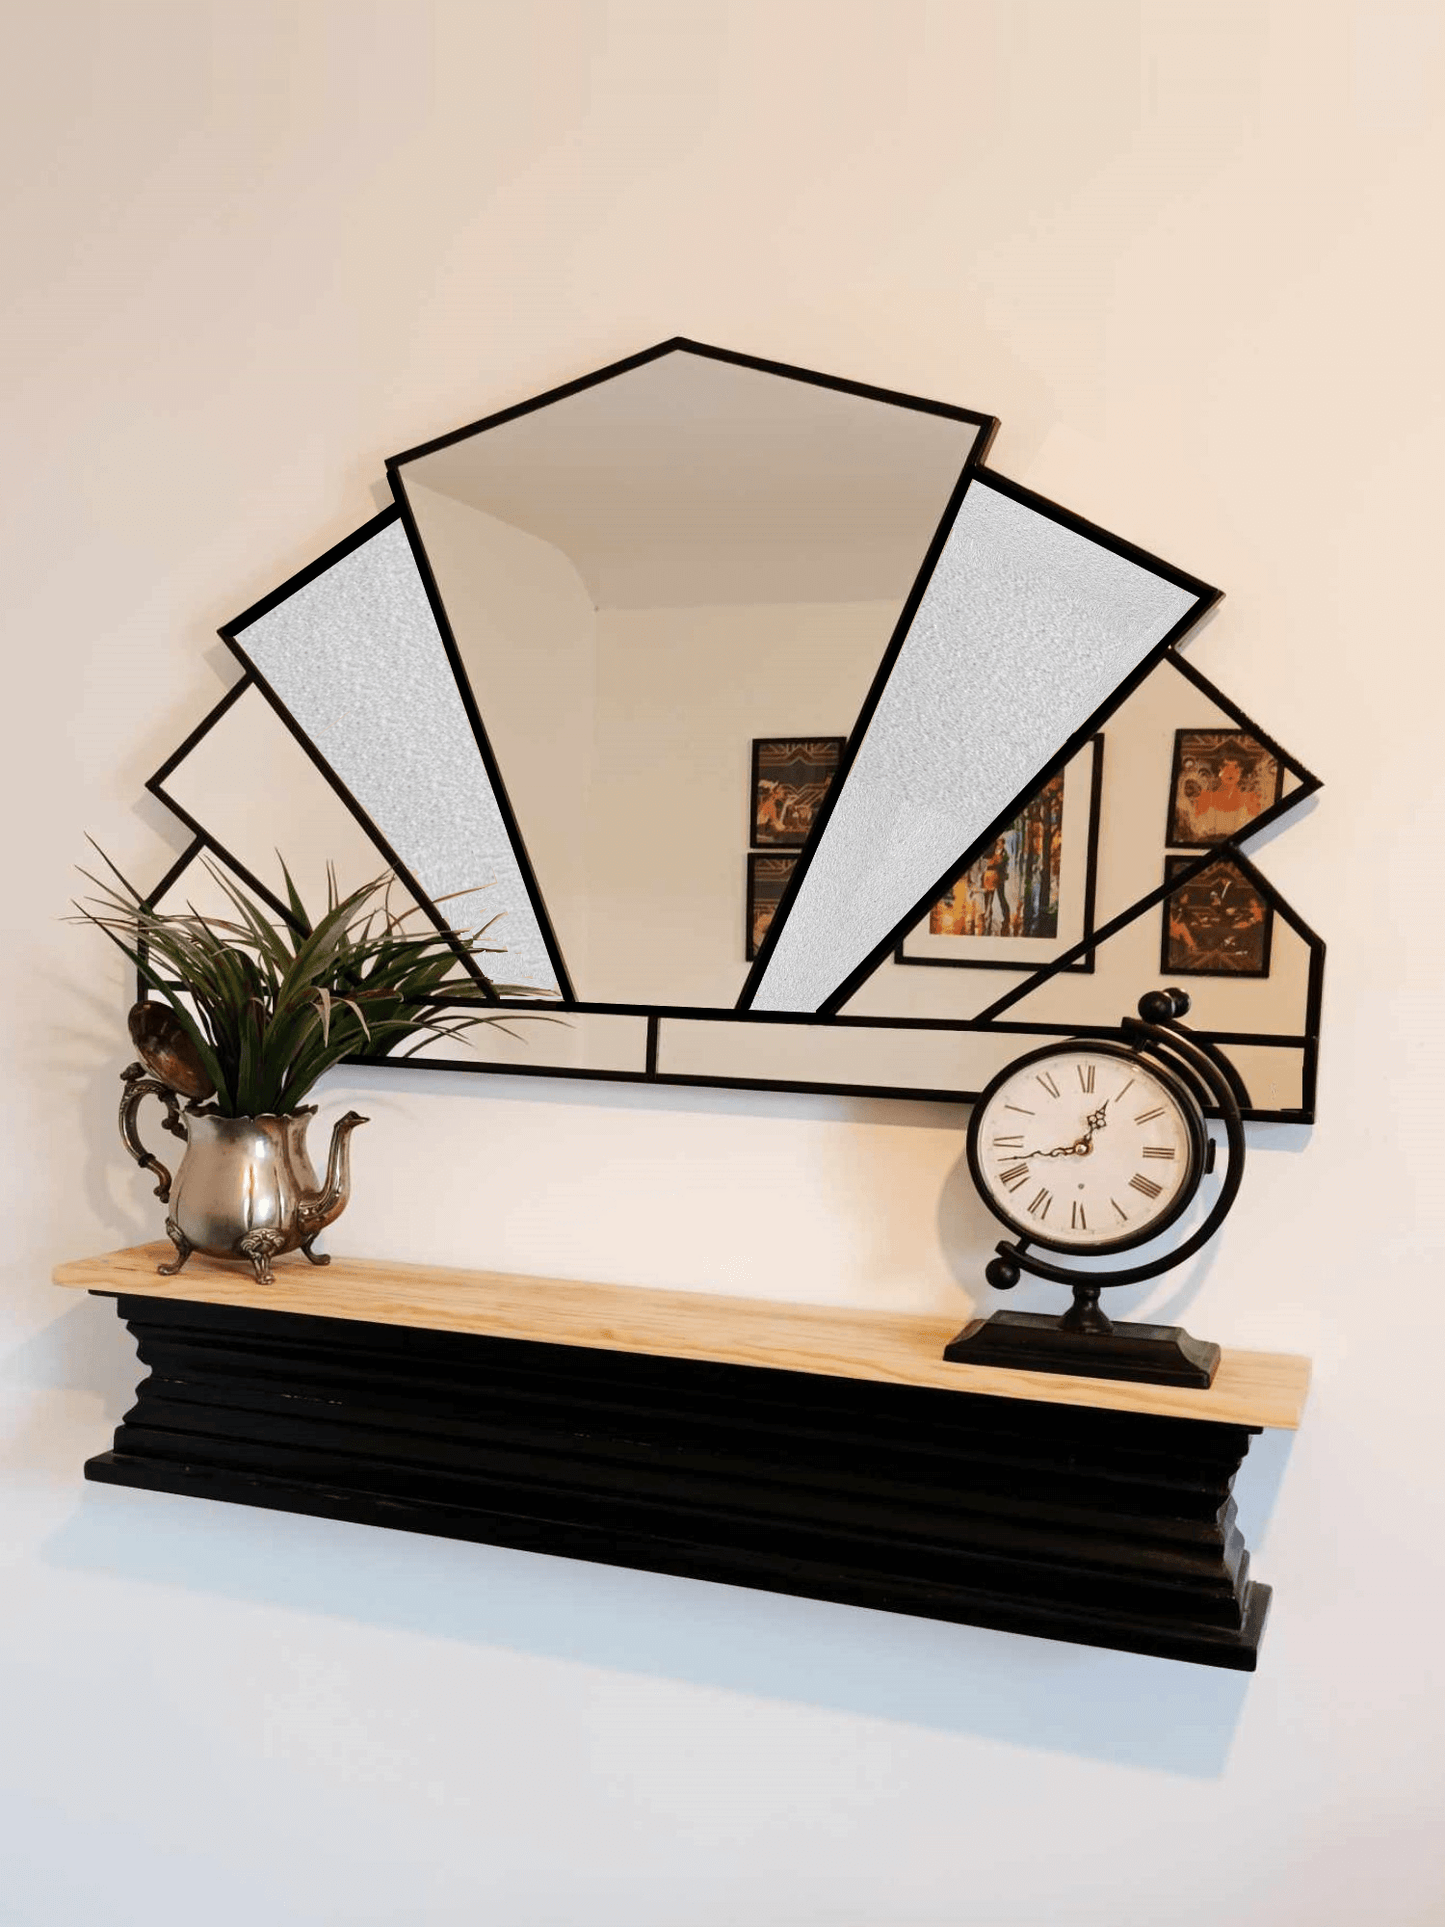 Handcrafted Stain Glass Extra Large Art Deco Wall Mirror - The Dome With Frosting Stain Glass Mirror